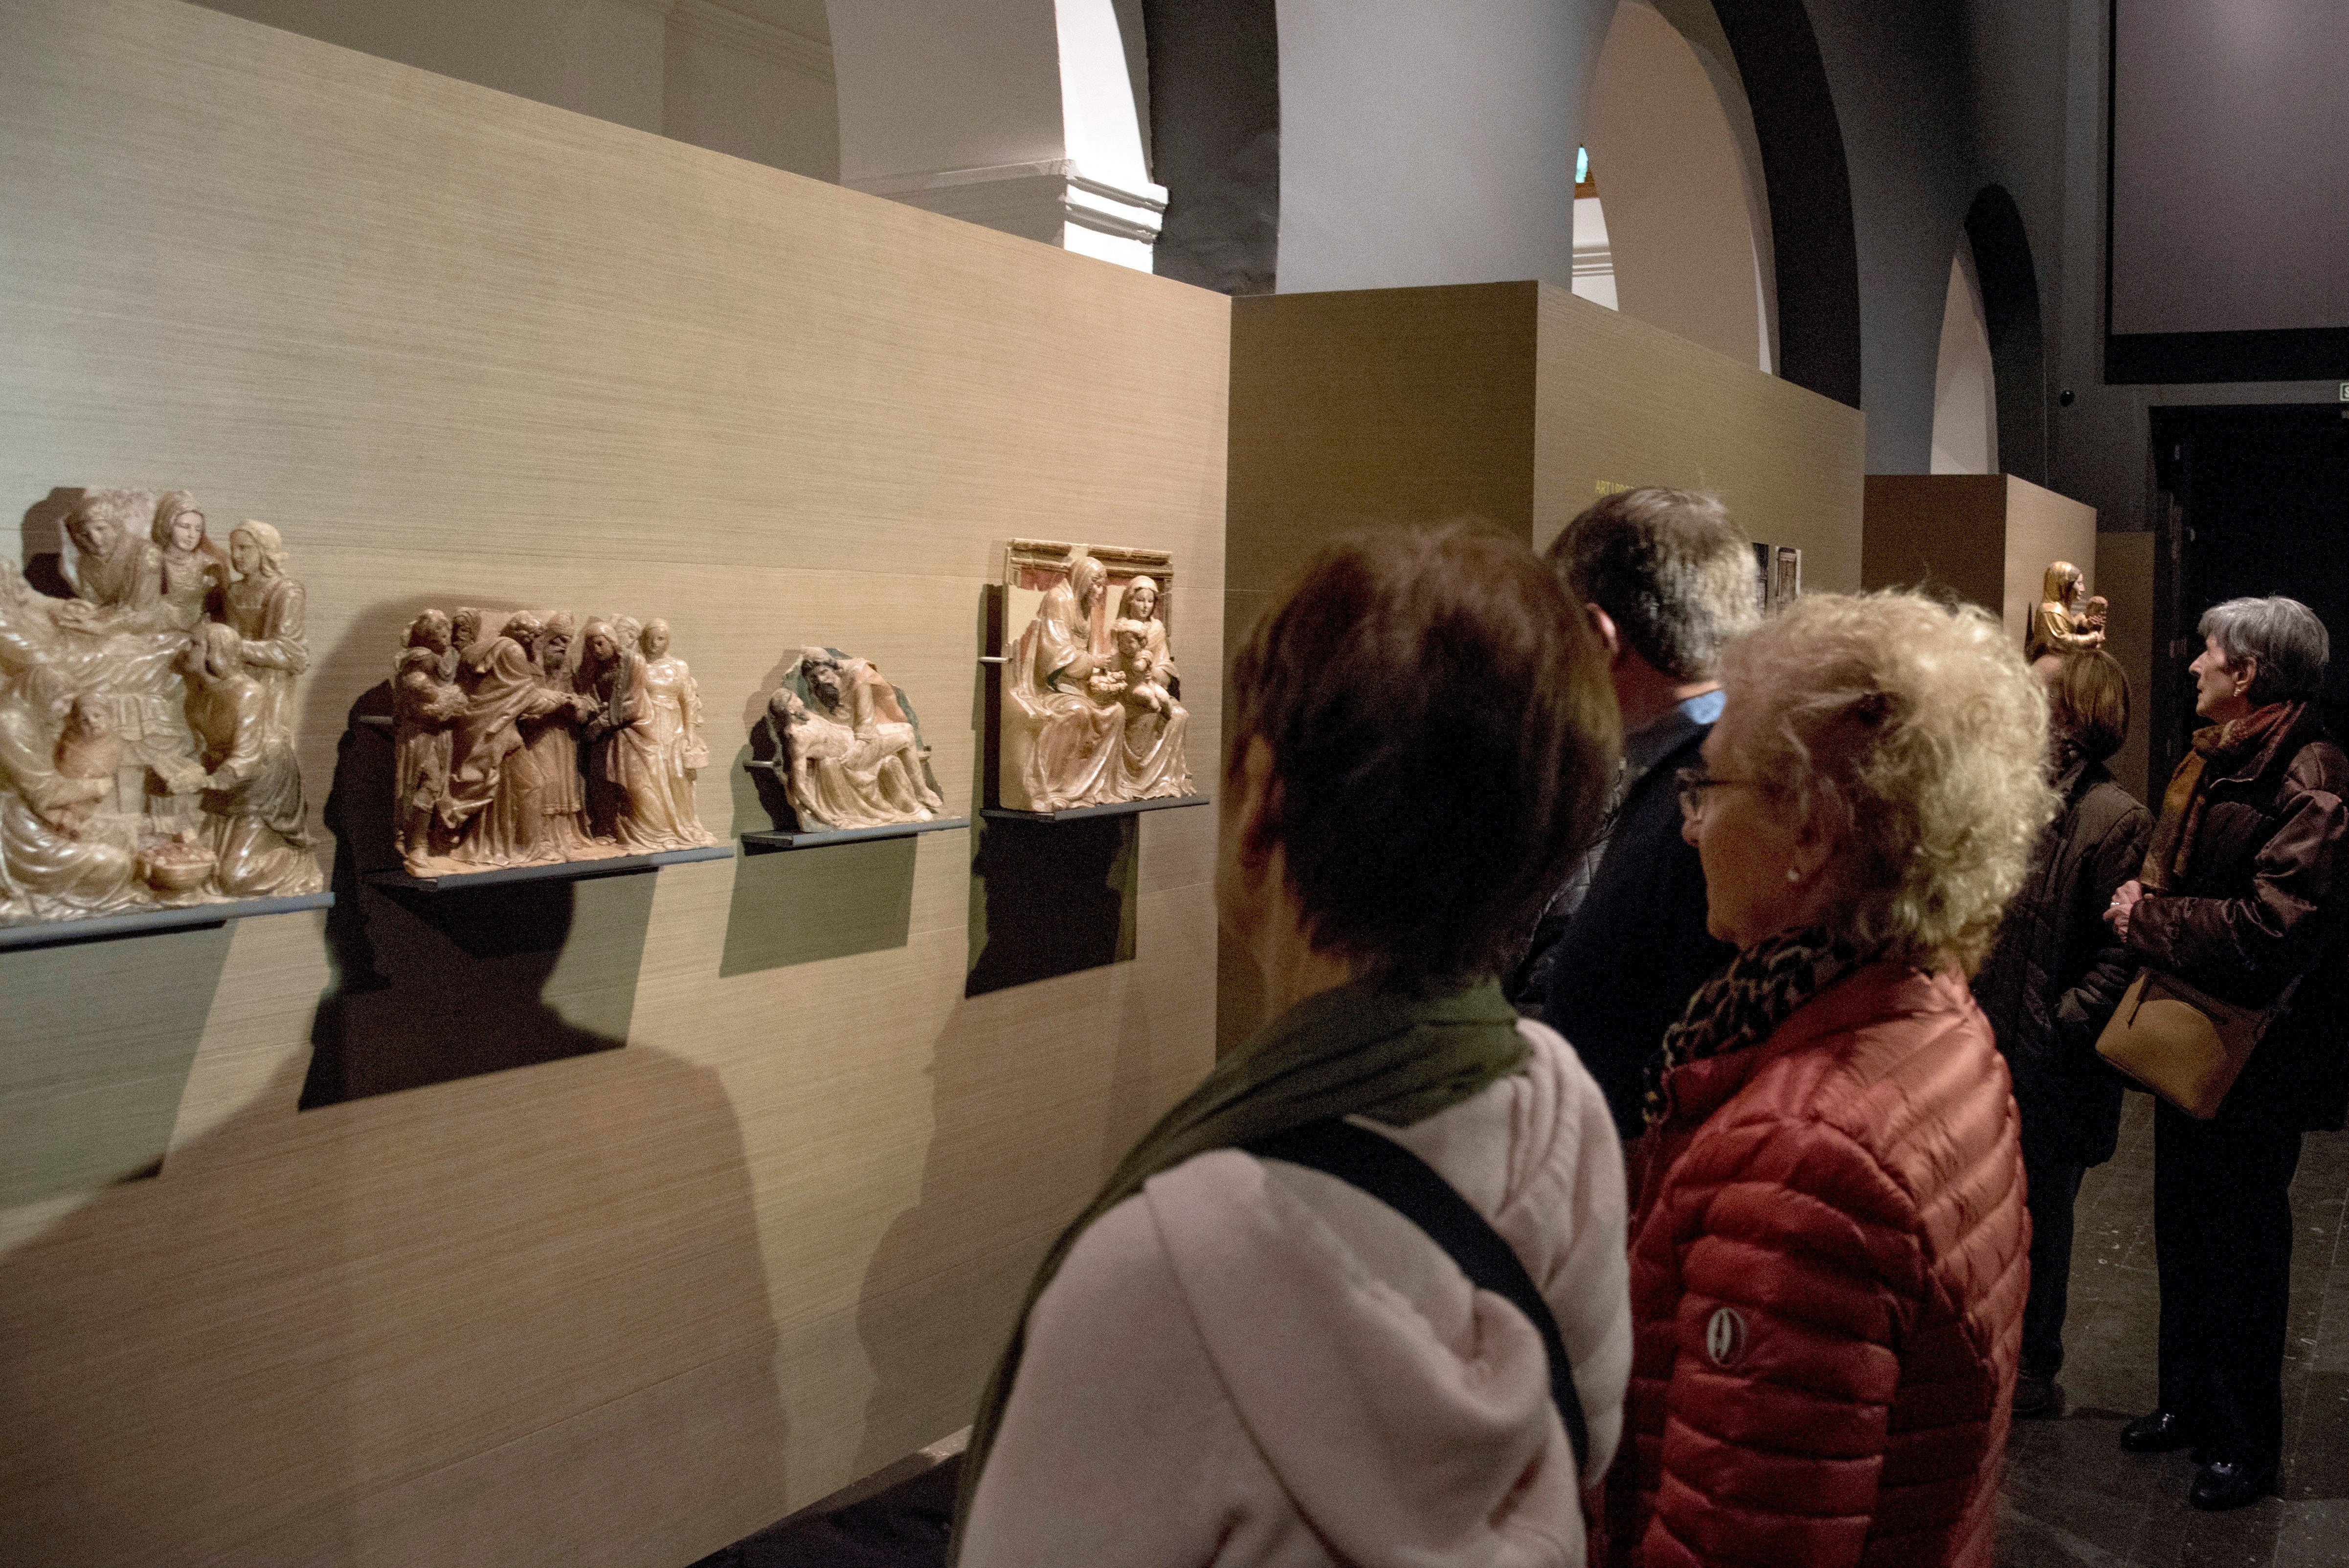 Aragonese court confirms claim on artworks on display in Catalonia